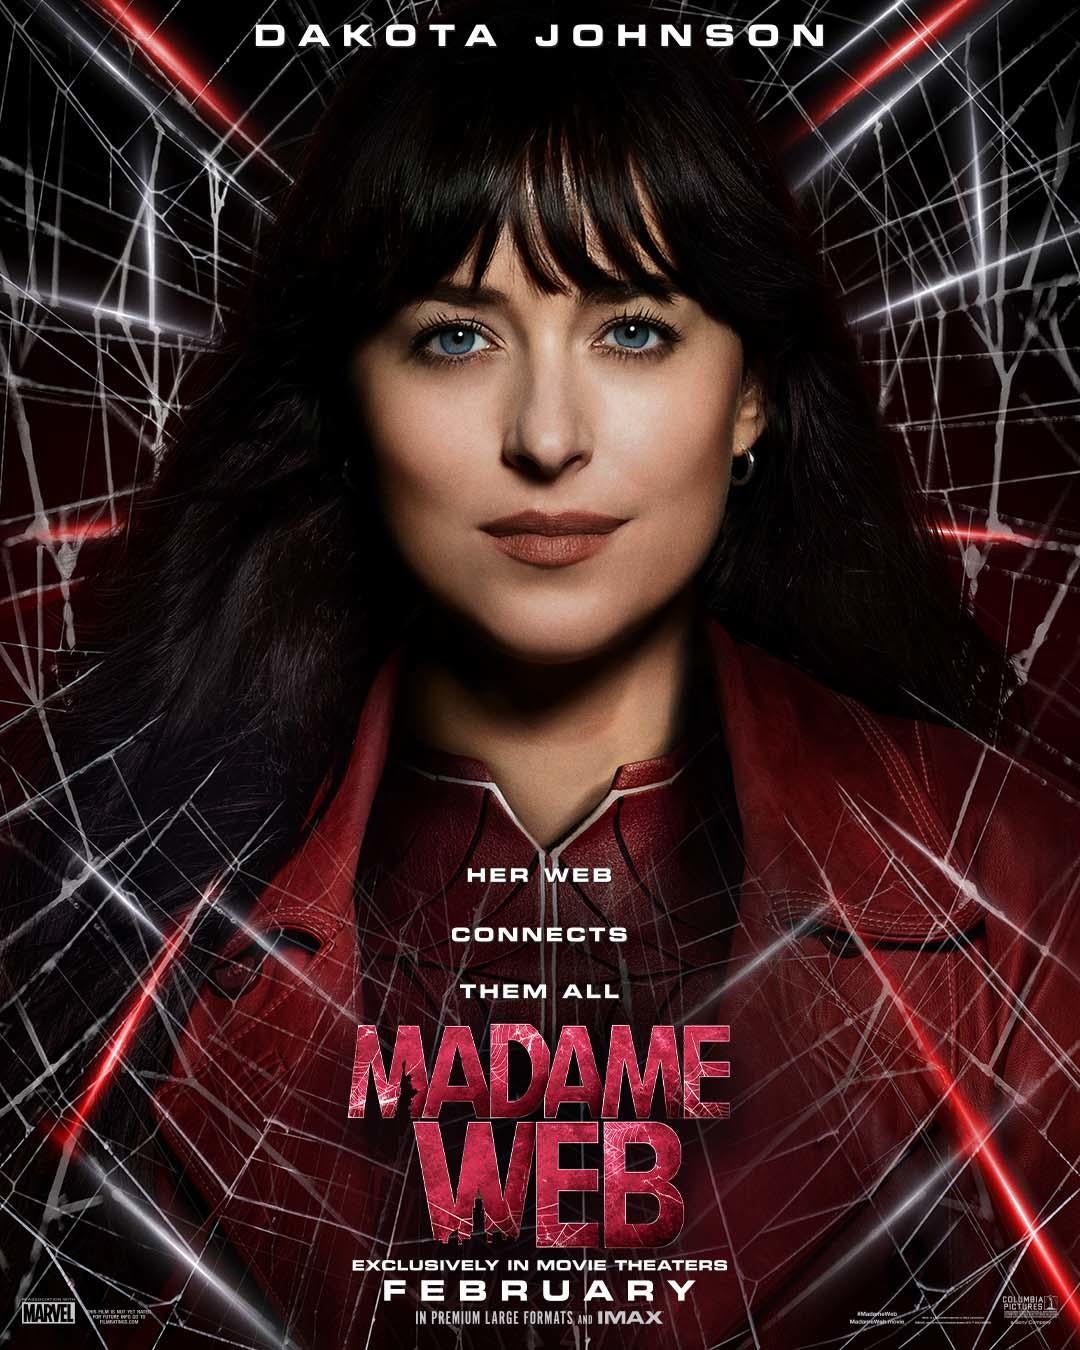 Madame Web Posters Highlight the Spider-Man Spinoff Cast